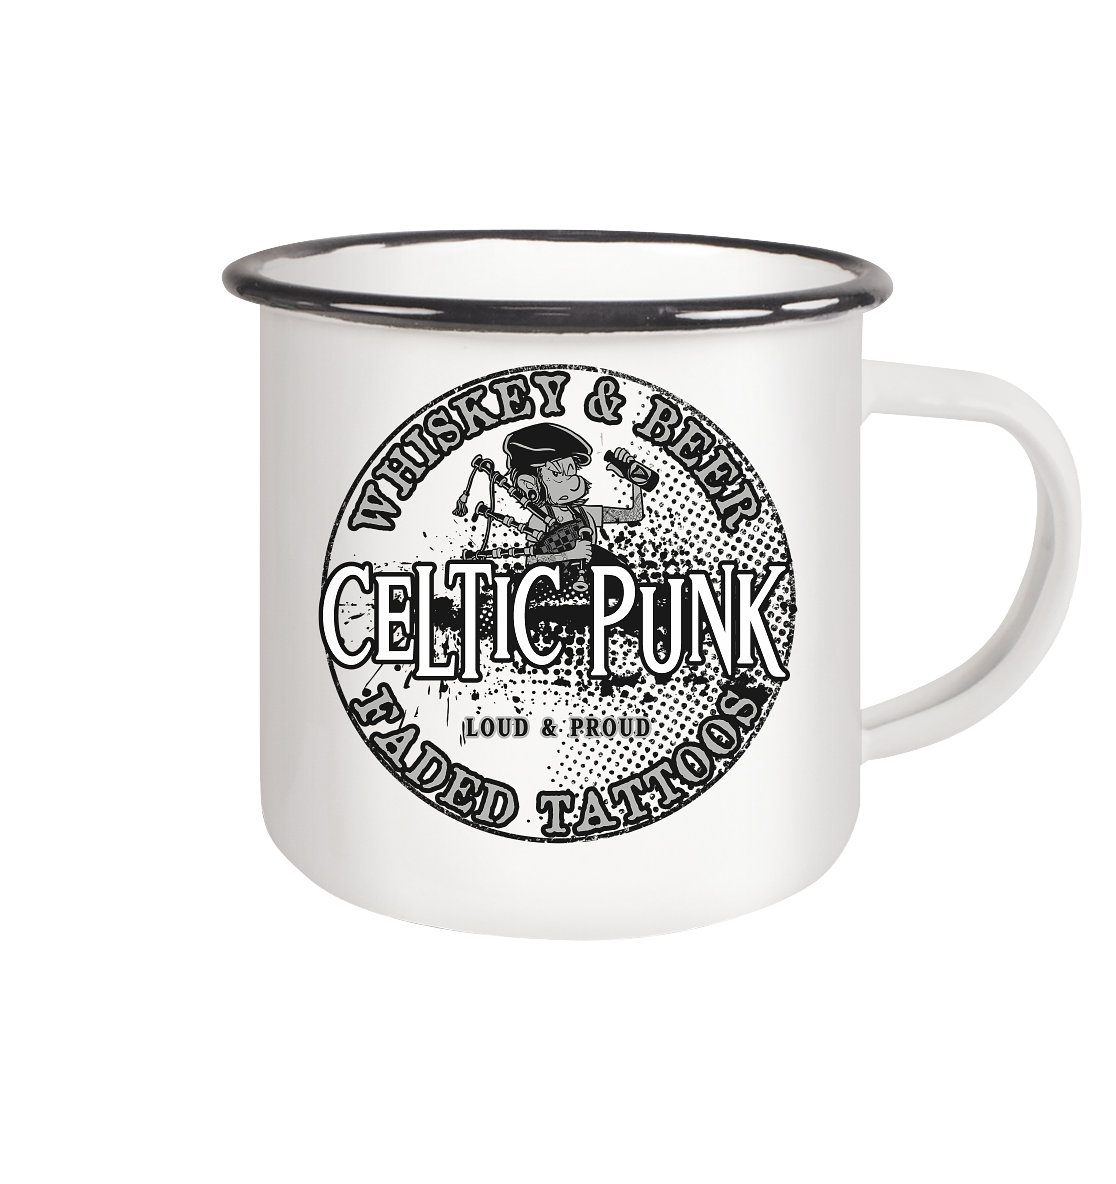 Celtic Punk "Whiskey, Beer & Faded Tattoos" - Emaille Tasse (Black)